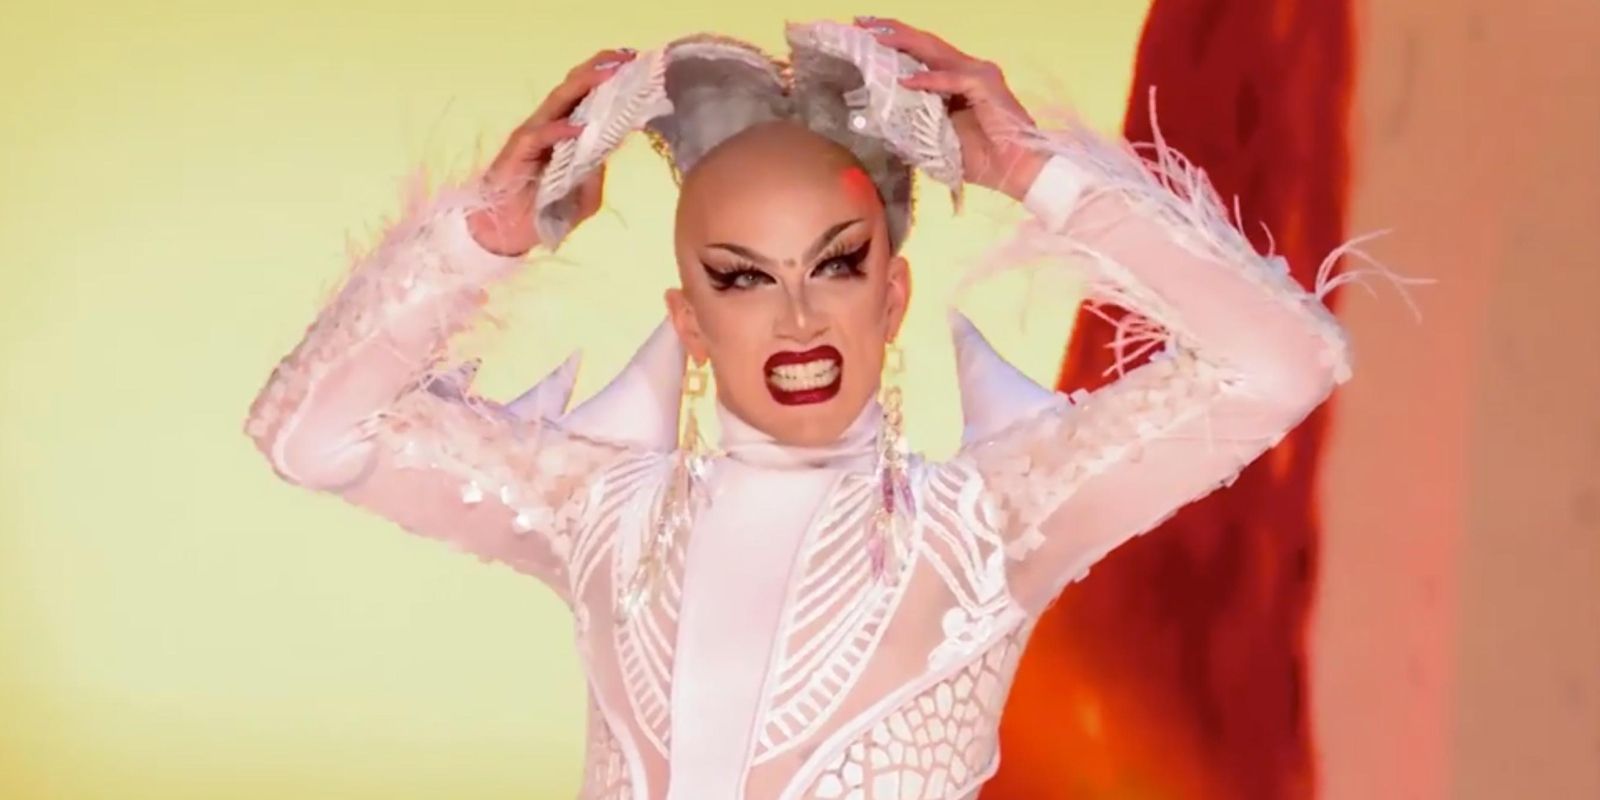 Sasha Velour takes off her mask on the stage in RuPaul's Drag Race.